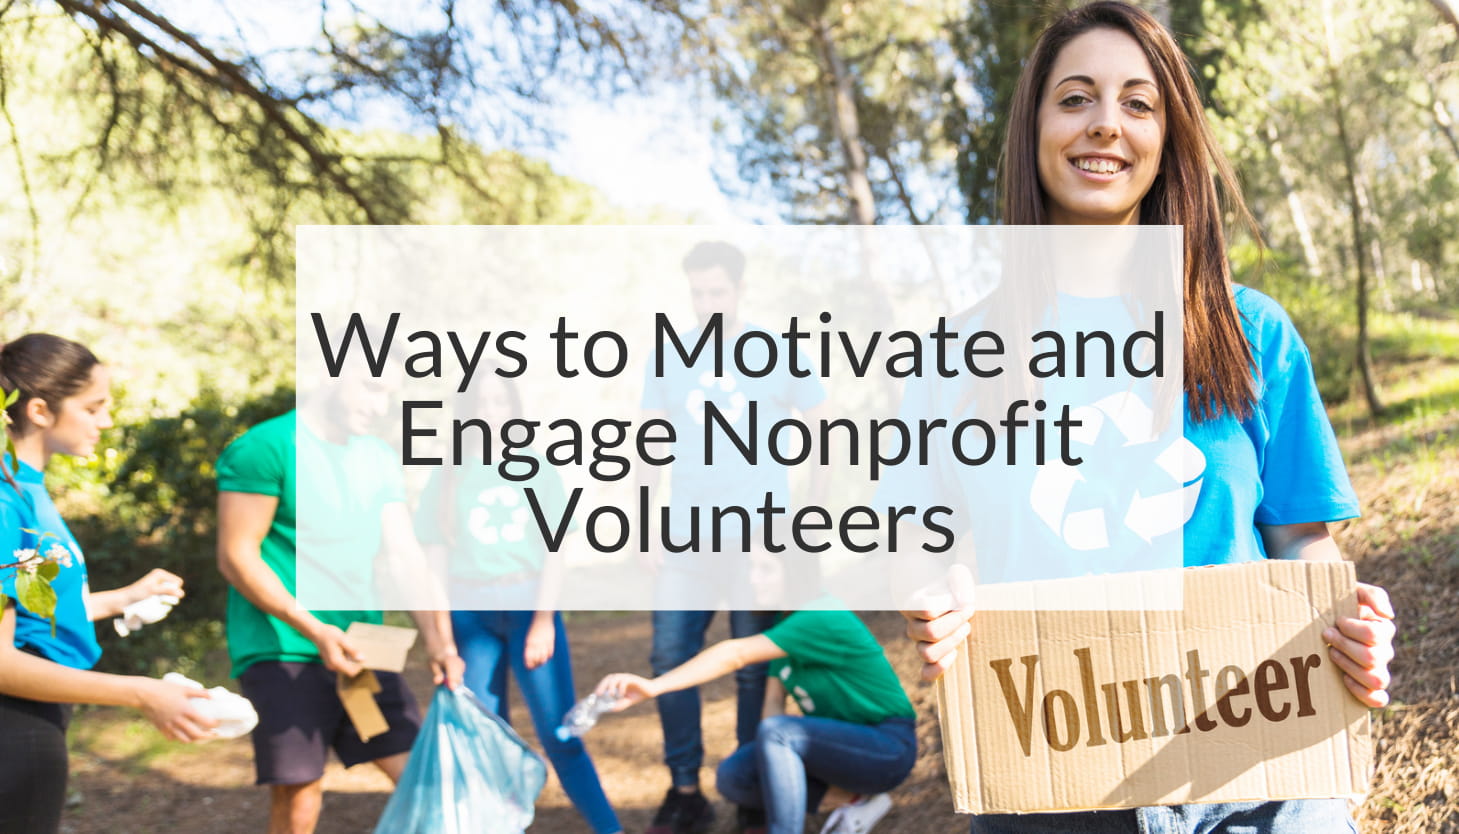 9 Ways to Motivate and Engage Your Nonprofit’s Volunteers